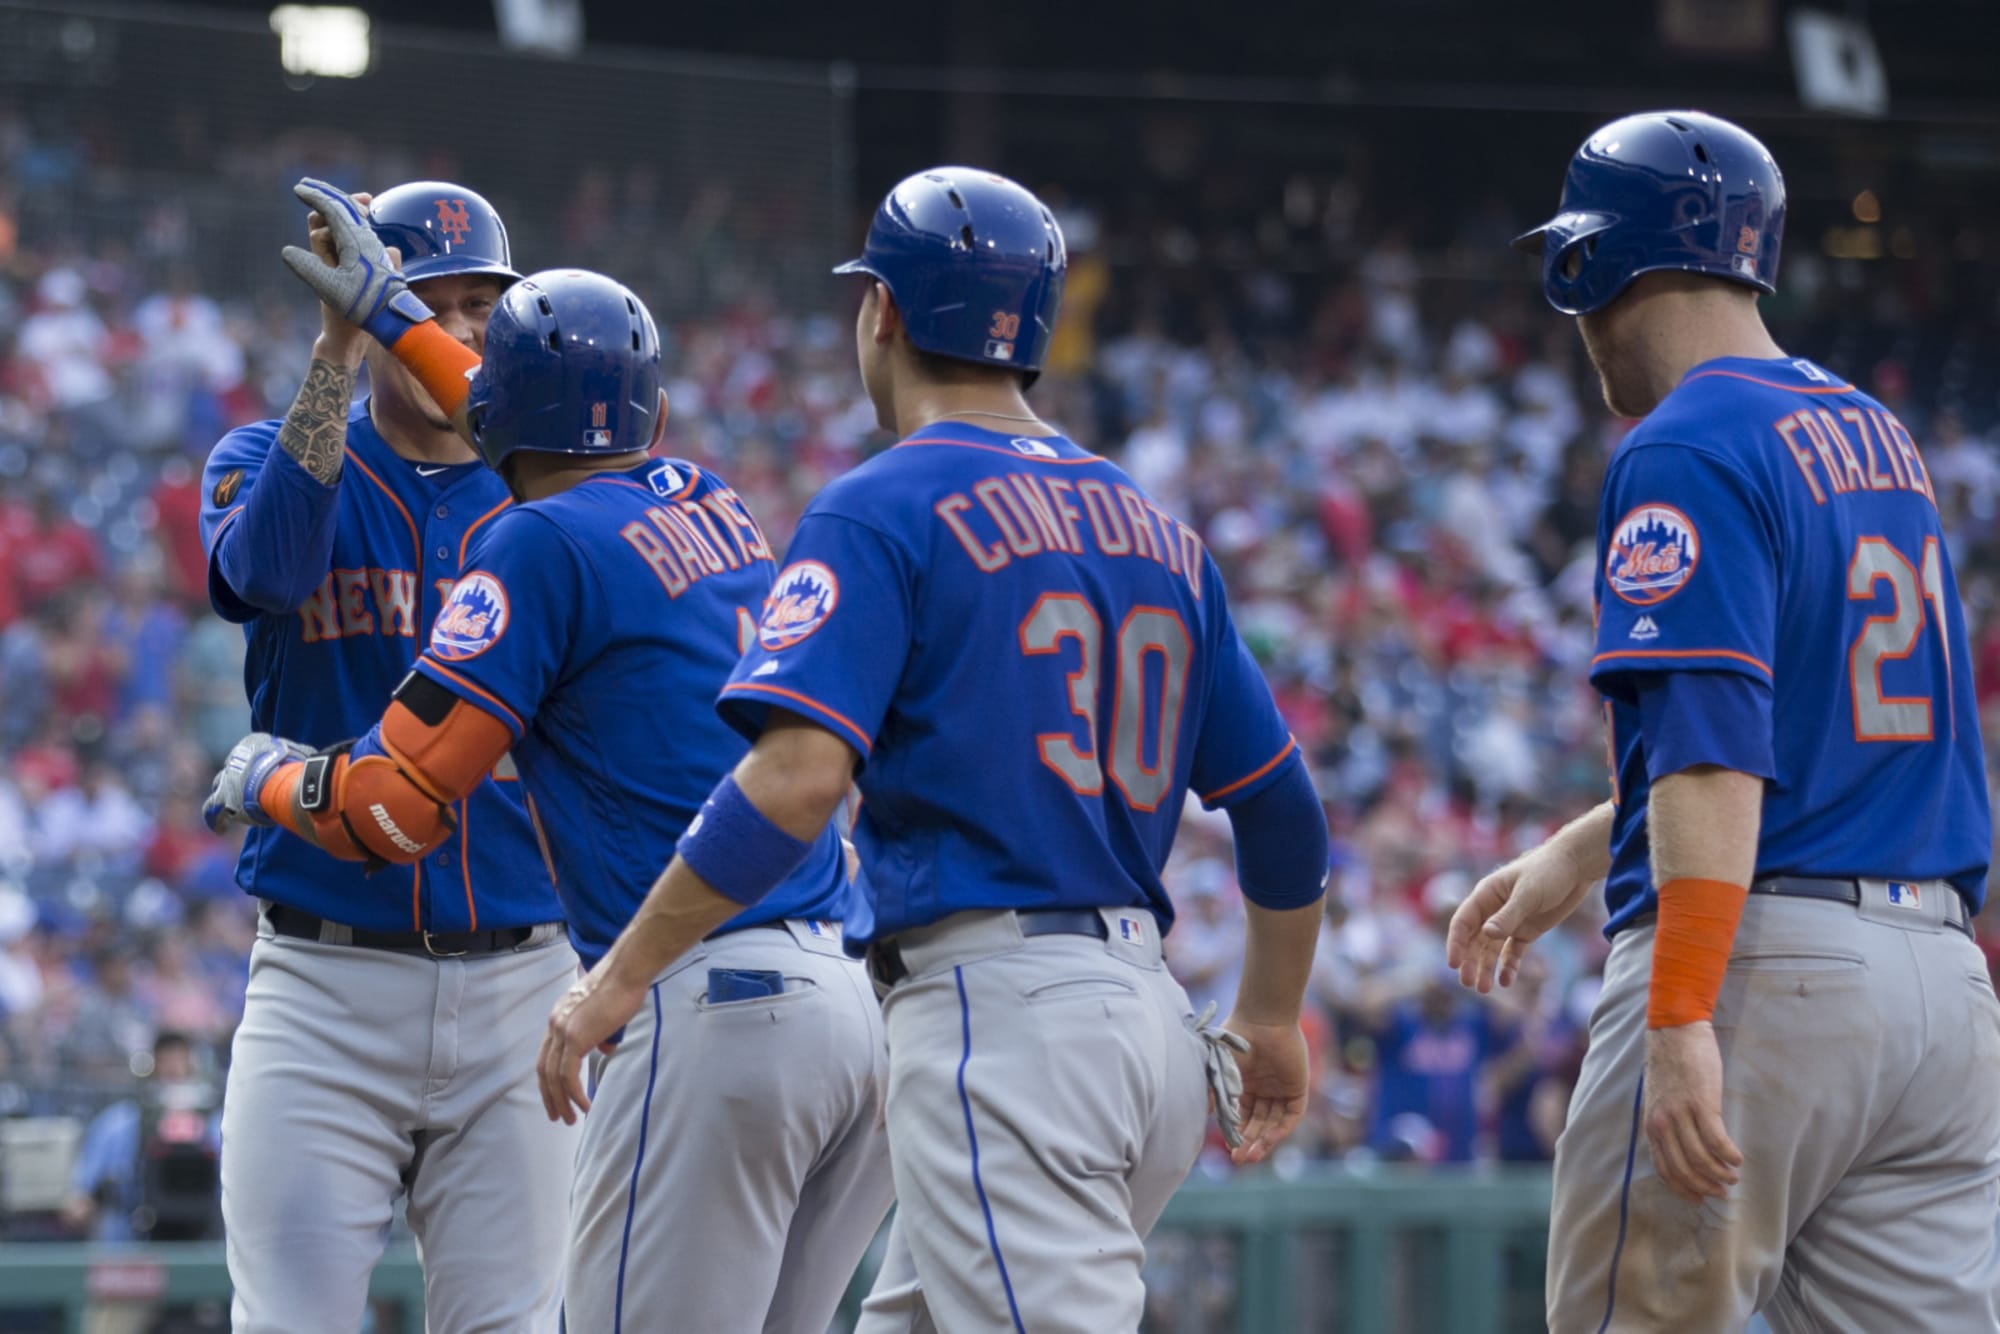 Oberst abstrakt Pirat New York Mets: How the Mets are becoming a competent baseball team